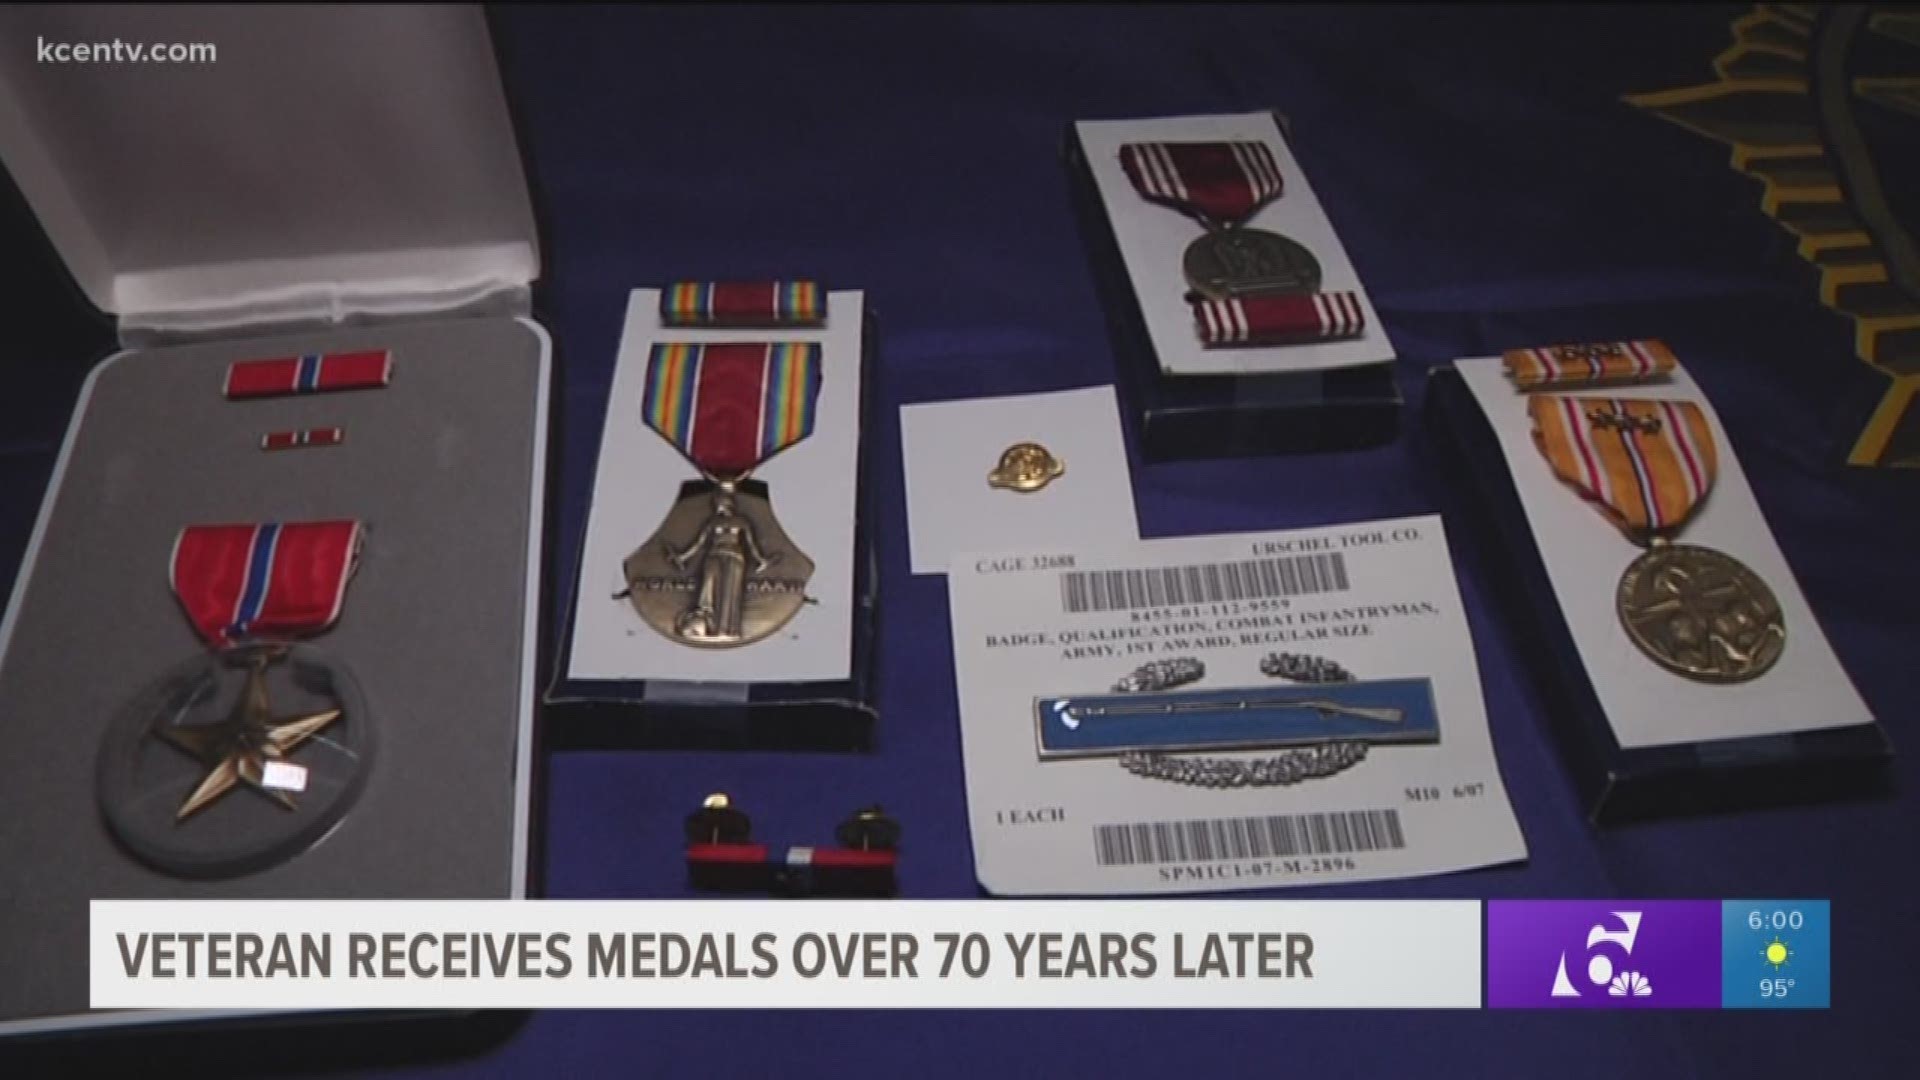 Frank Thompson was awarded multiple medals after serving in WWII over 70 years later